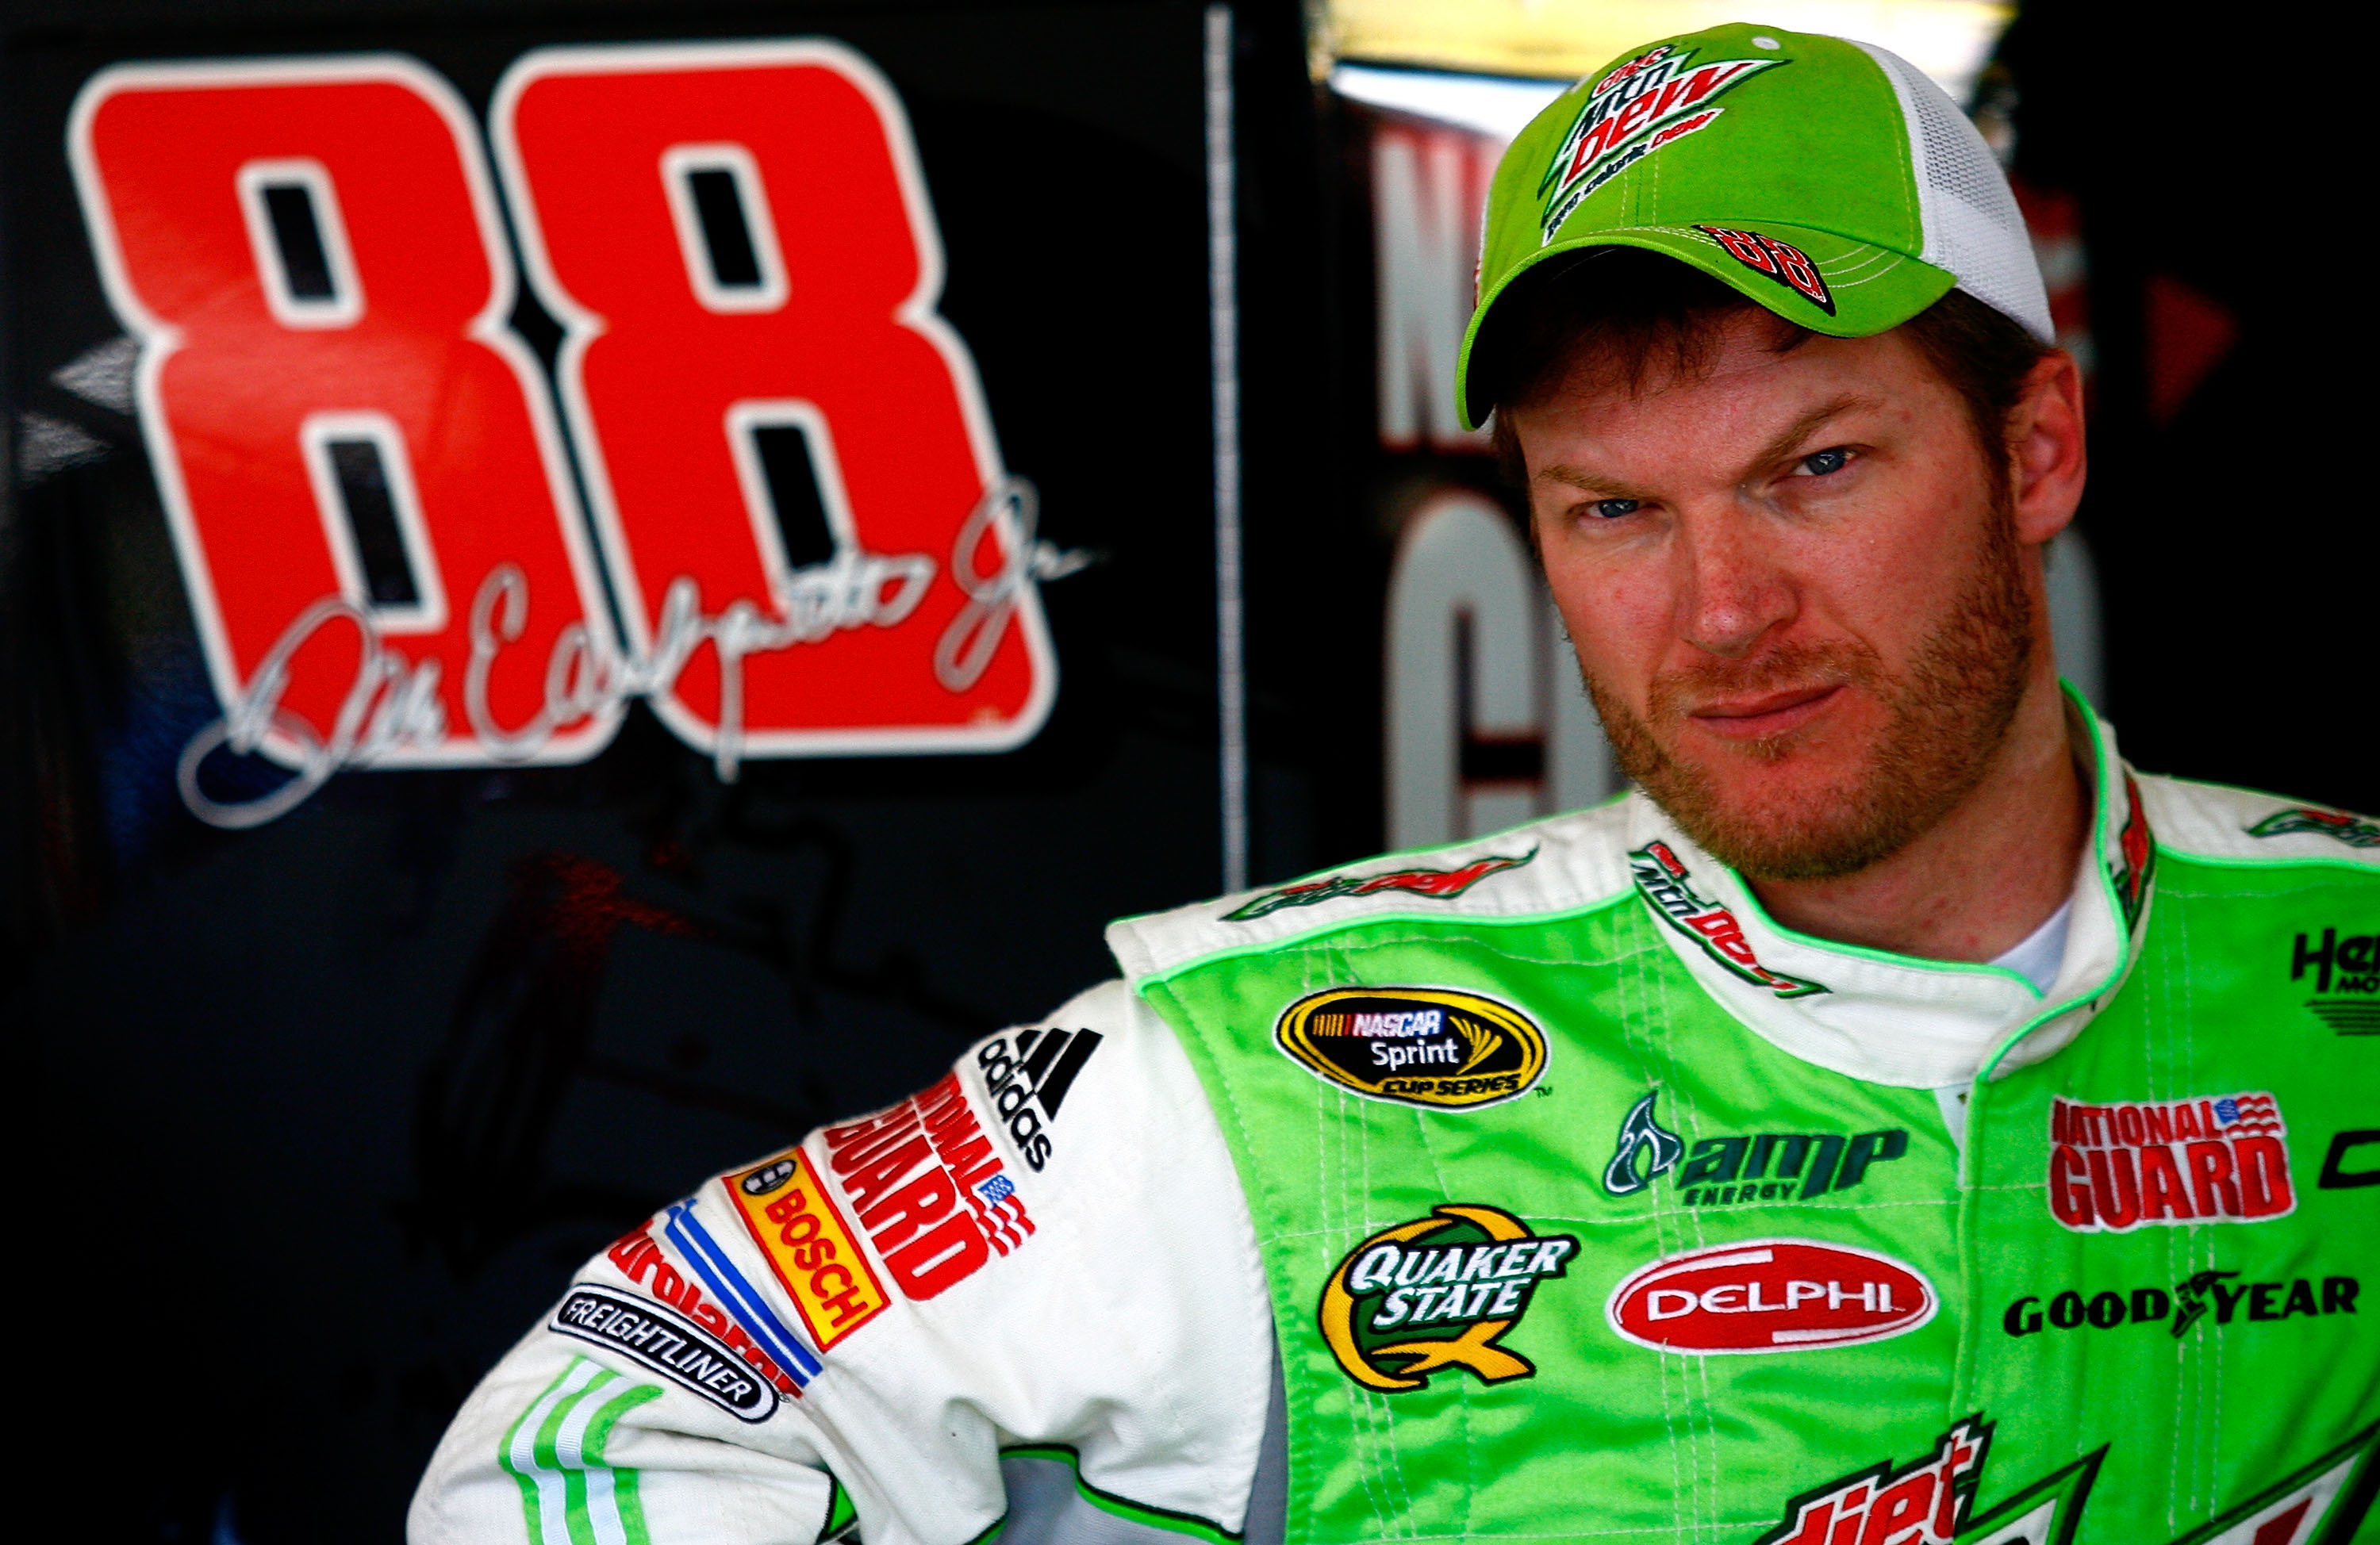 AVONDALE, AZ - NOVEMBER 13:  Dale Earnhardt Jr., driver of the #88 Diet Mountain Dew Chevrolet, stands in the garage area during practice for the NASCAR Sprint Cup Series Kobalt Tools 500 at Phoenix International Raceway on November 13, 2010 in Avondale,